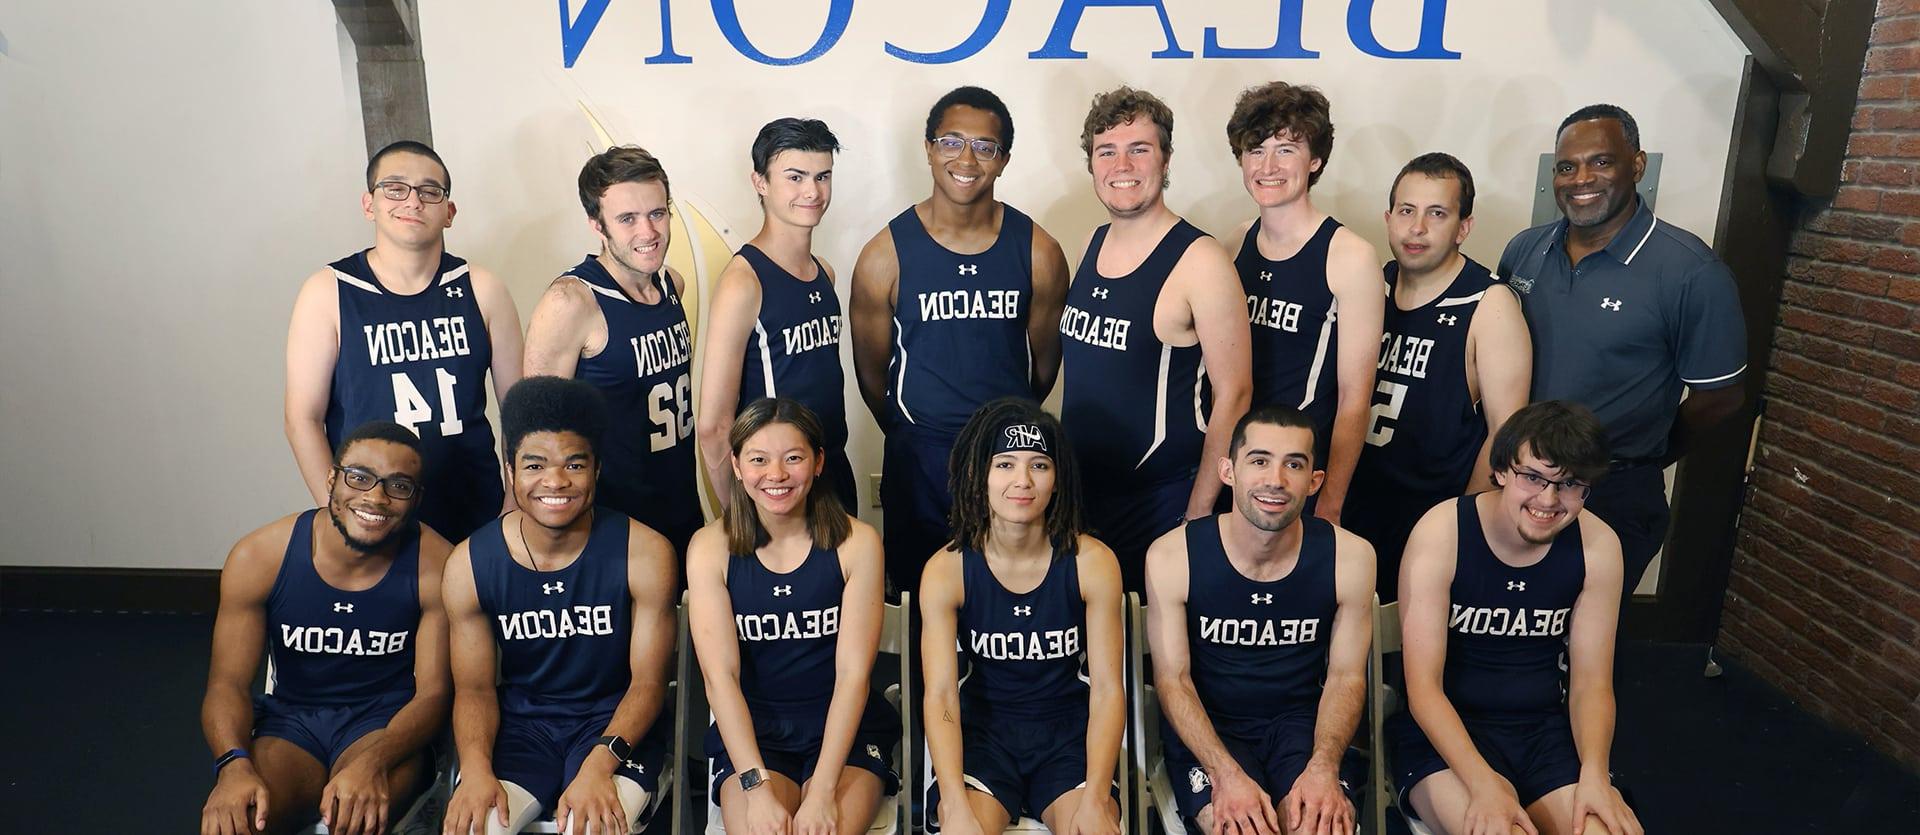 Cross Country and Track Roster Photo